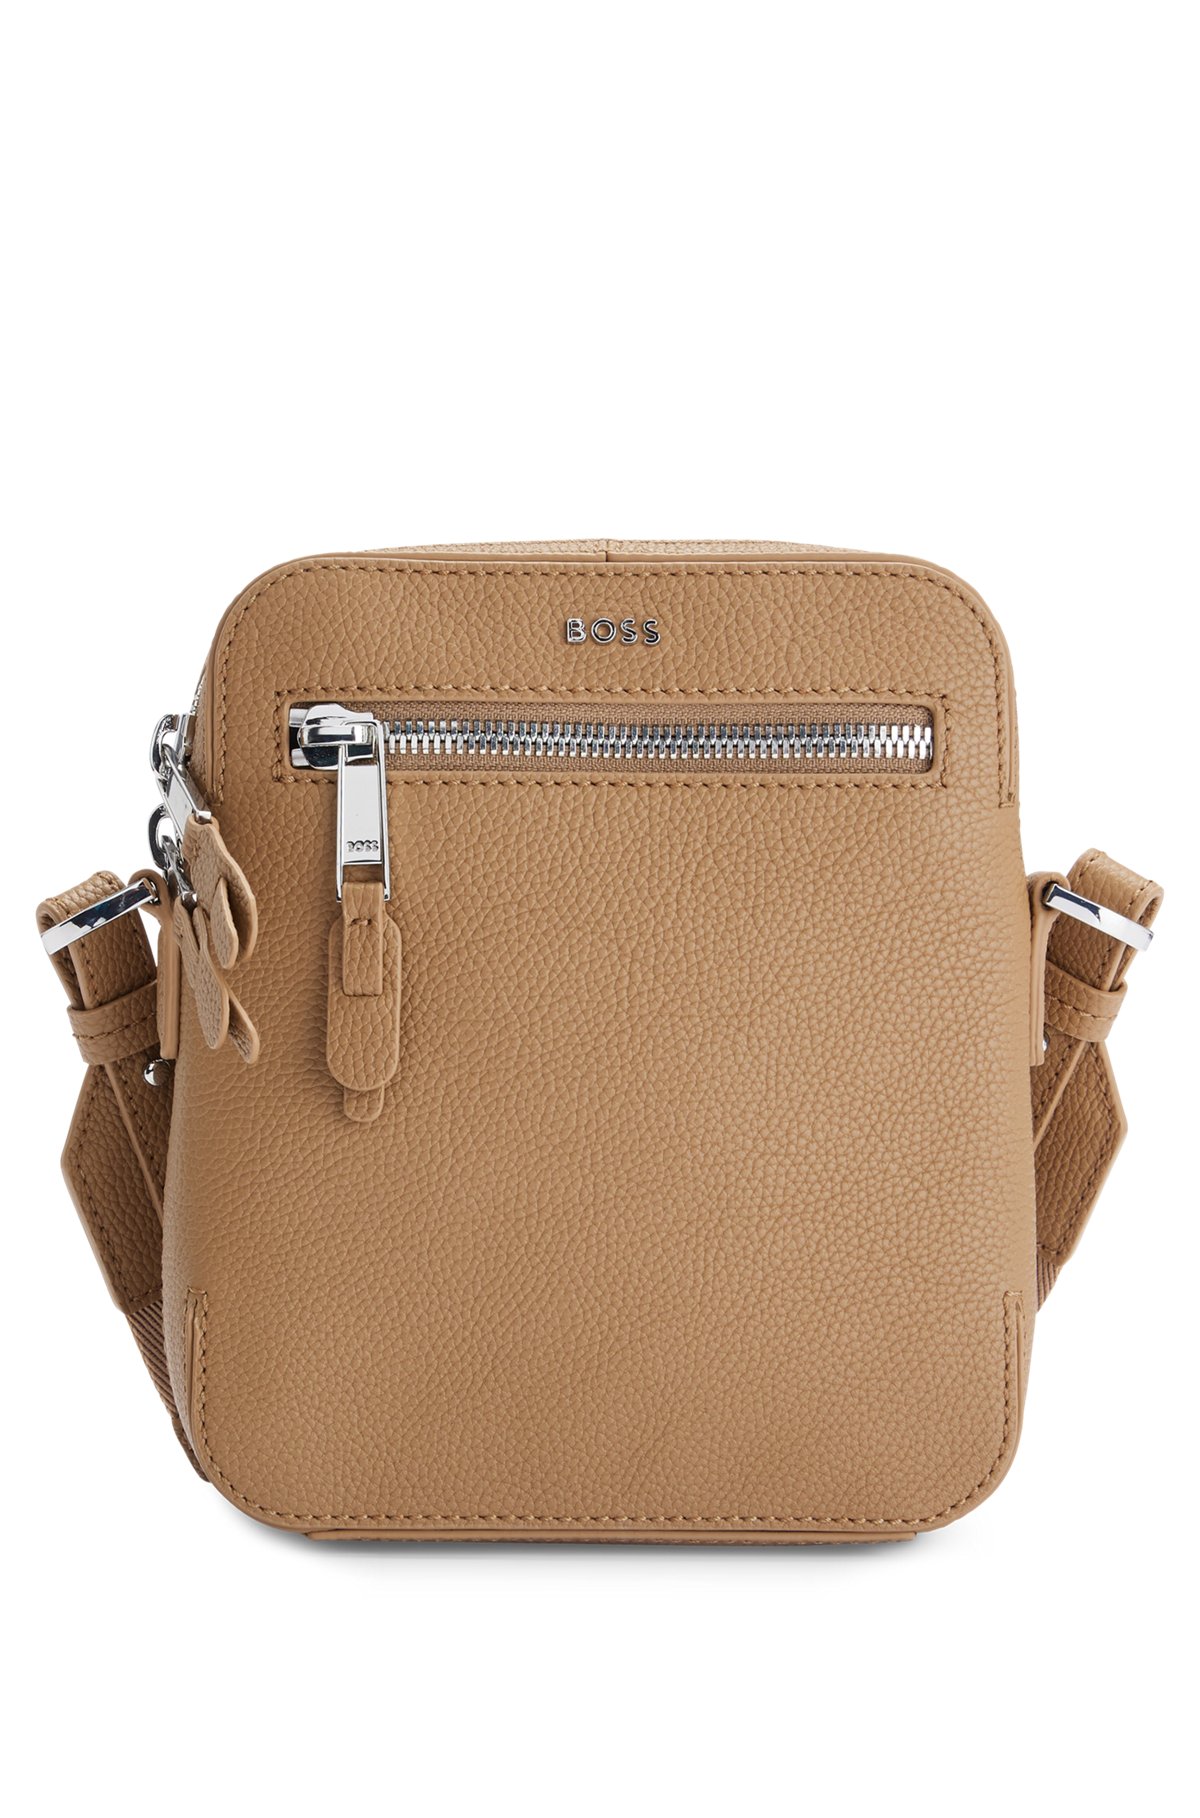 Grained-leather reporter bag with zipped front pocket, Beige